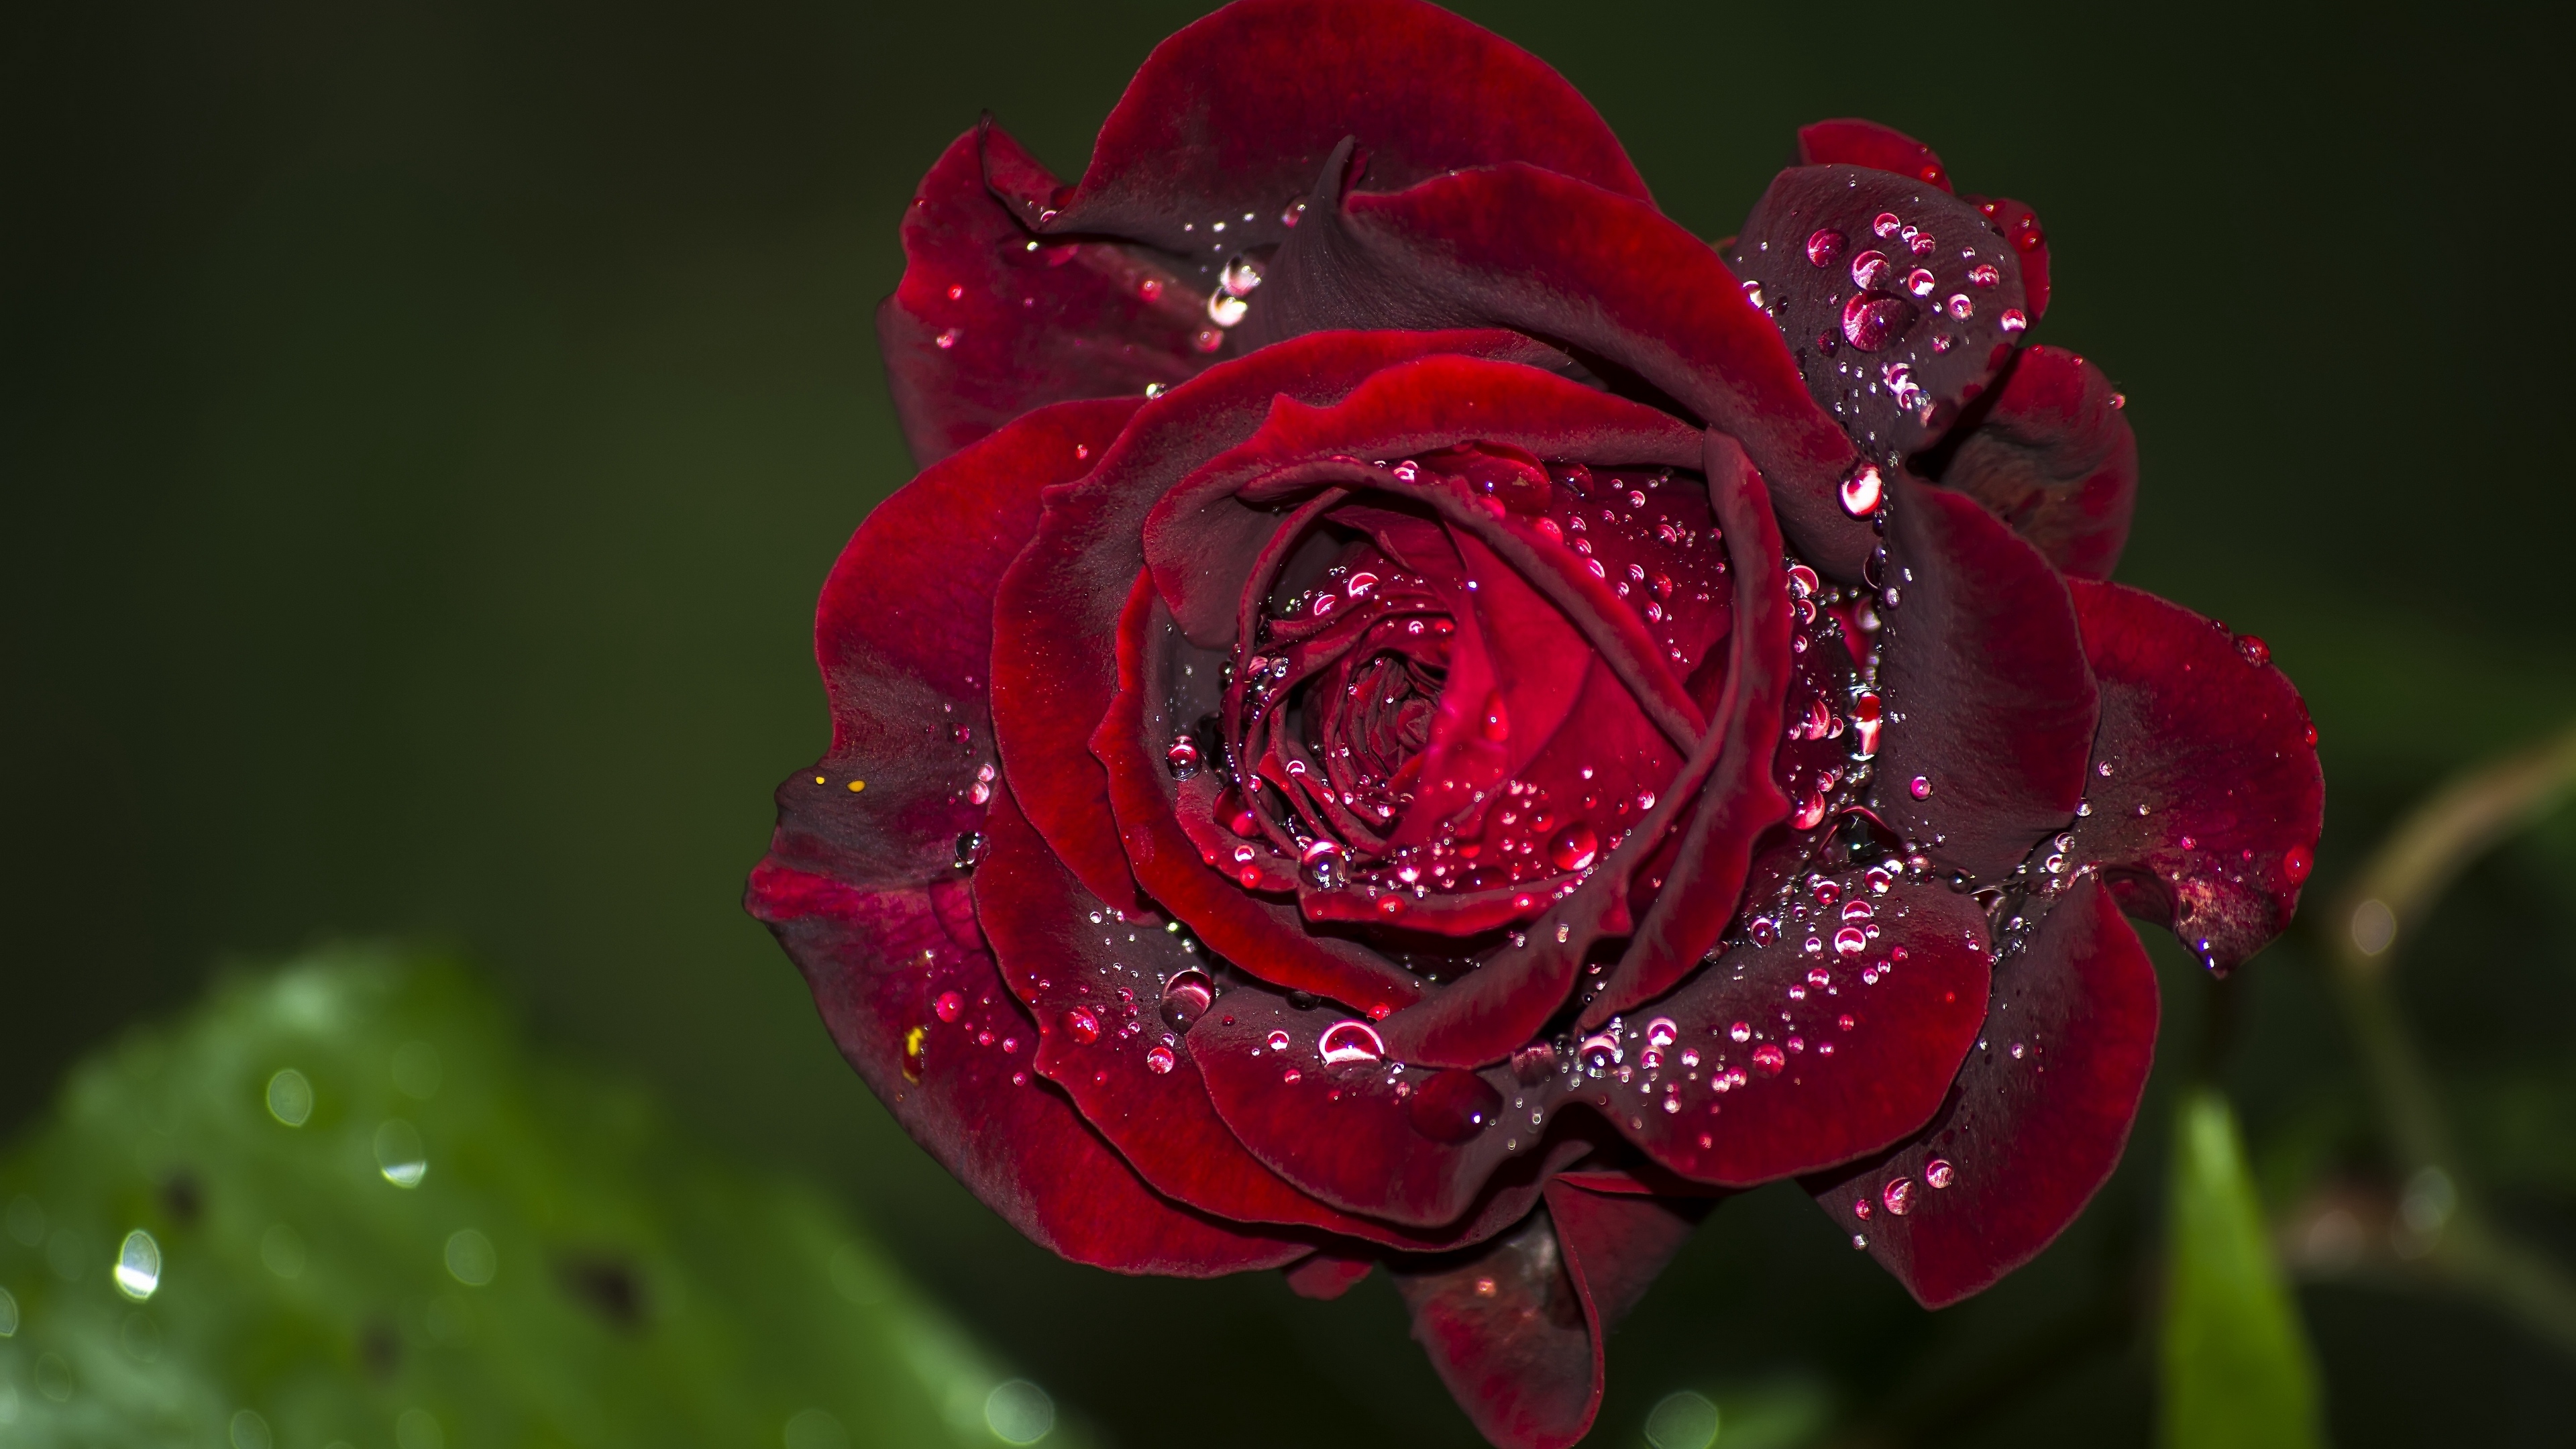 rose red drops macro 4k 1540064773 - rose, red, drops, macro 4k - Rose, red, Drops